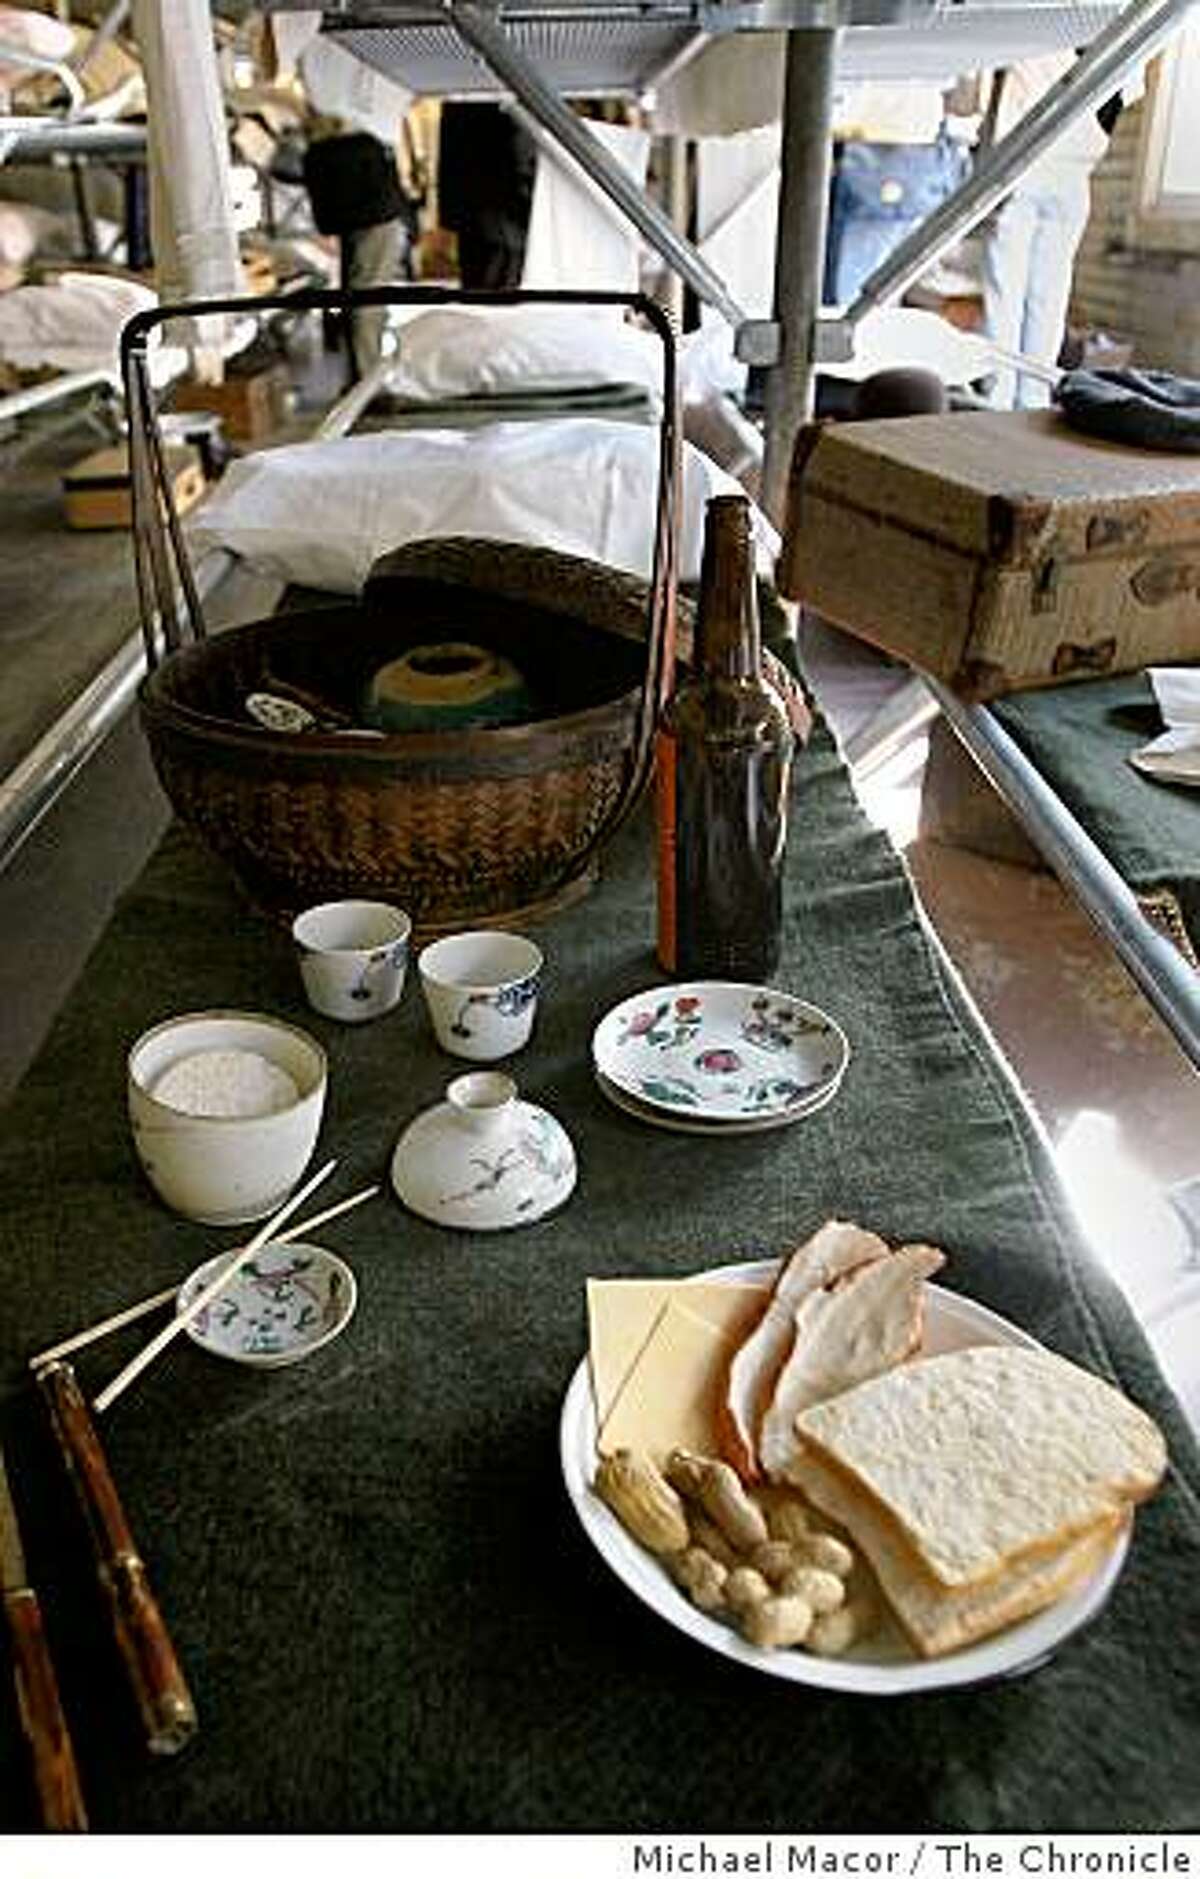 Details of the men's barracks have been recreated to reflect what life was like for Chinese immigrants who arrive at the Angel Island Immigration Center, in Tiburon, Calif. waiting for approval to come into America.